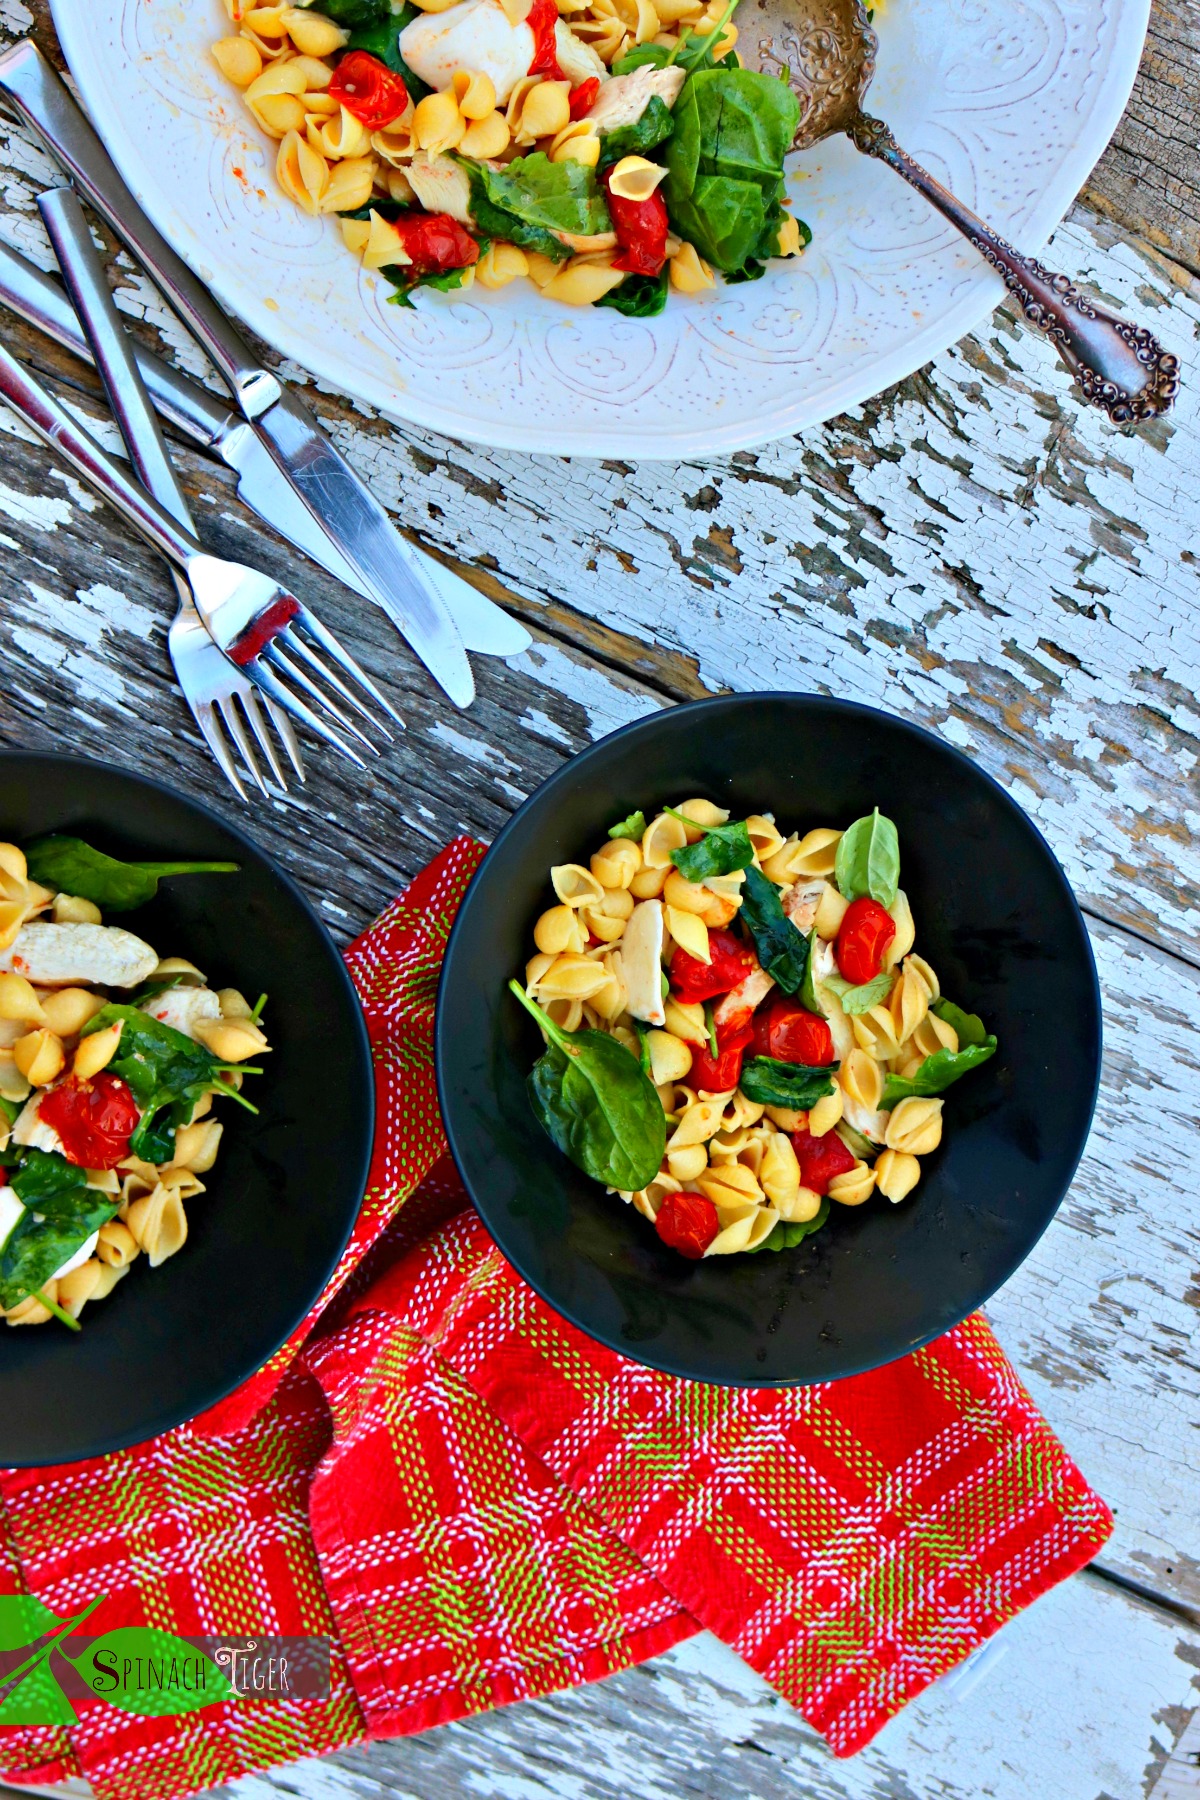 Chicken Pasta Shells, Gluten free with Roasted Tomatoes, Spinach from Spinach Tiger